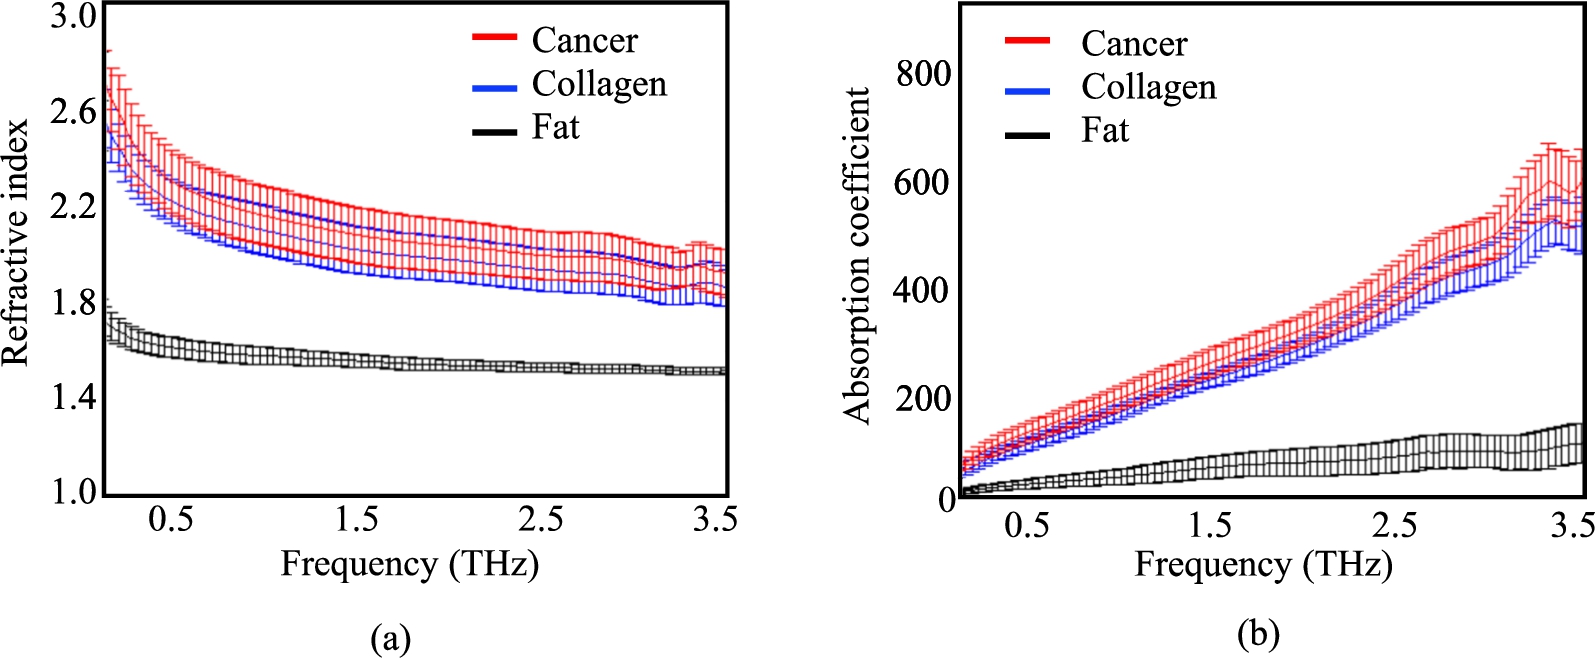 The mean spectroscopy data for all fresh human cancer and healthy breast tissues. (a) The transmission refractive indices for cancer, collagen, and fat. (b) The transmission absorption coefficient for cancer, collagen, and fat. The transmission spectroscopic data in (a) and (b) is average over 10 individual points from each tissue type [4].